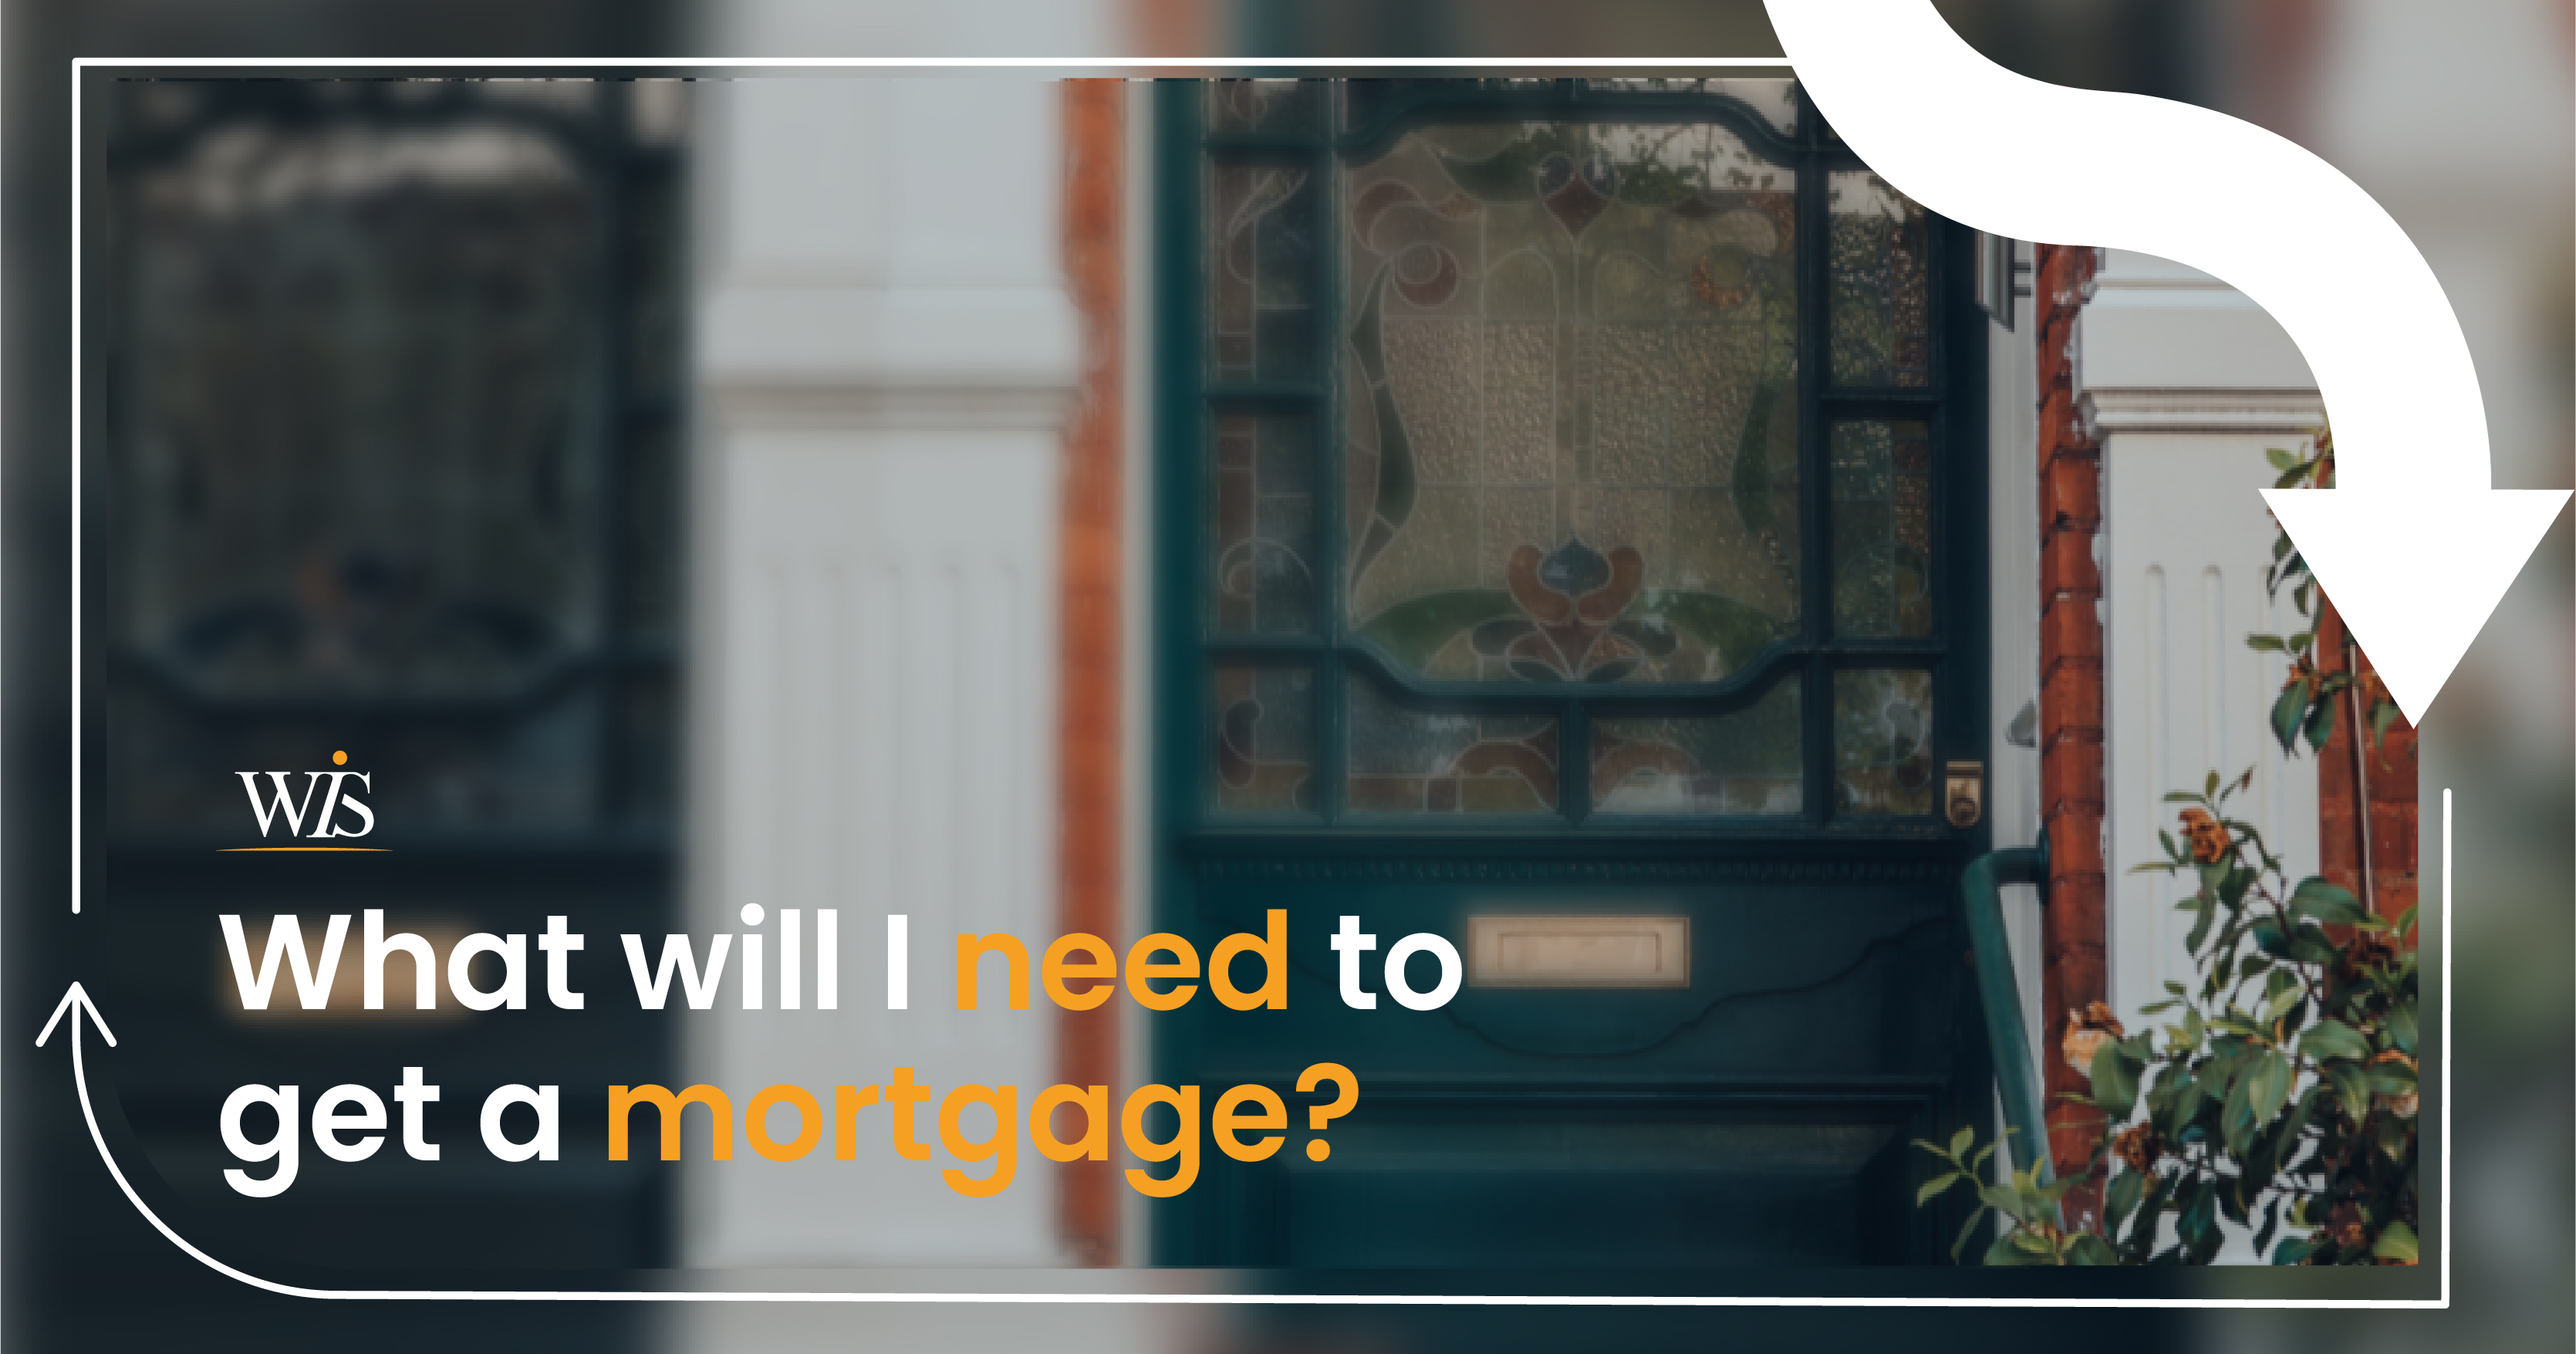 What will I need to get a mortgage? image